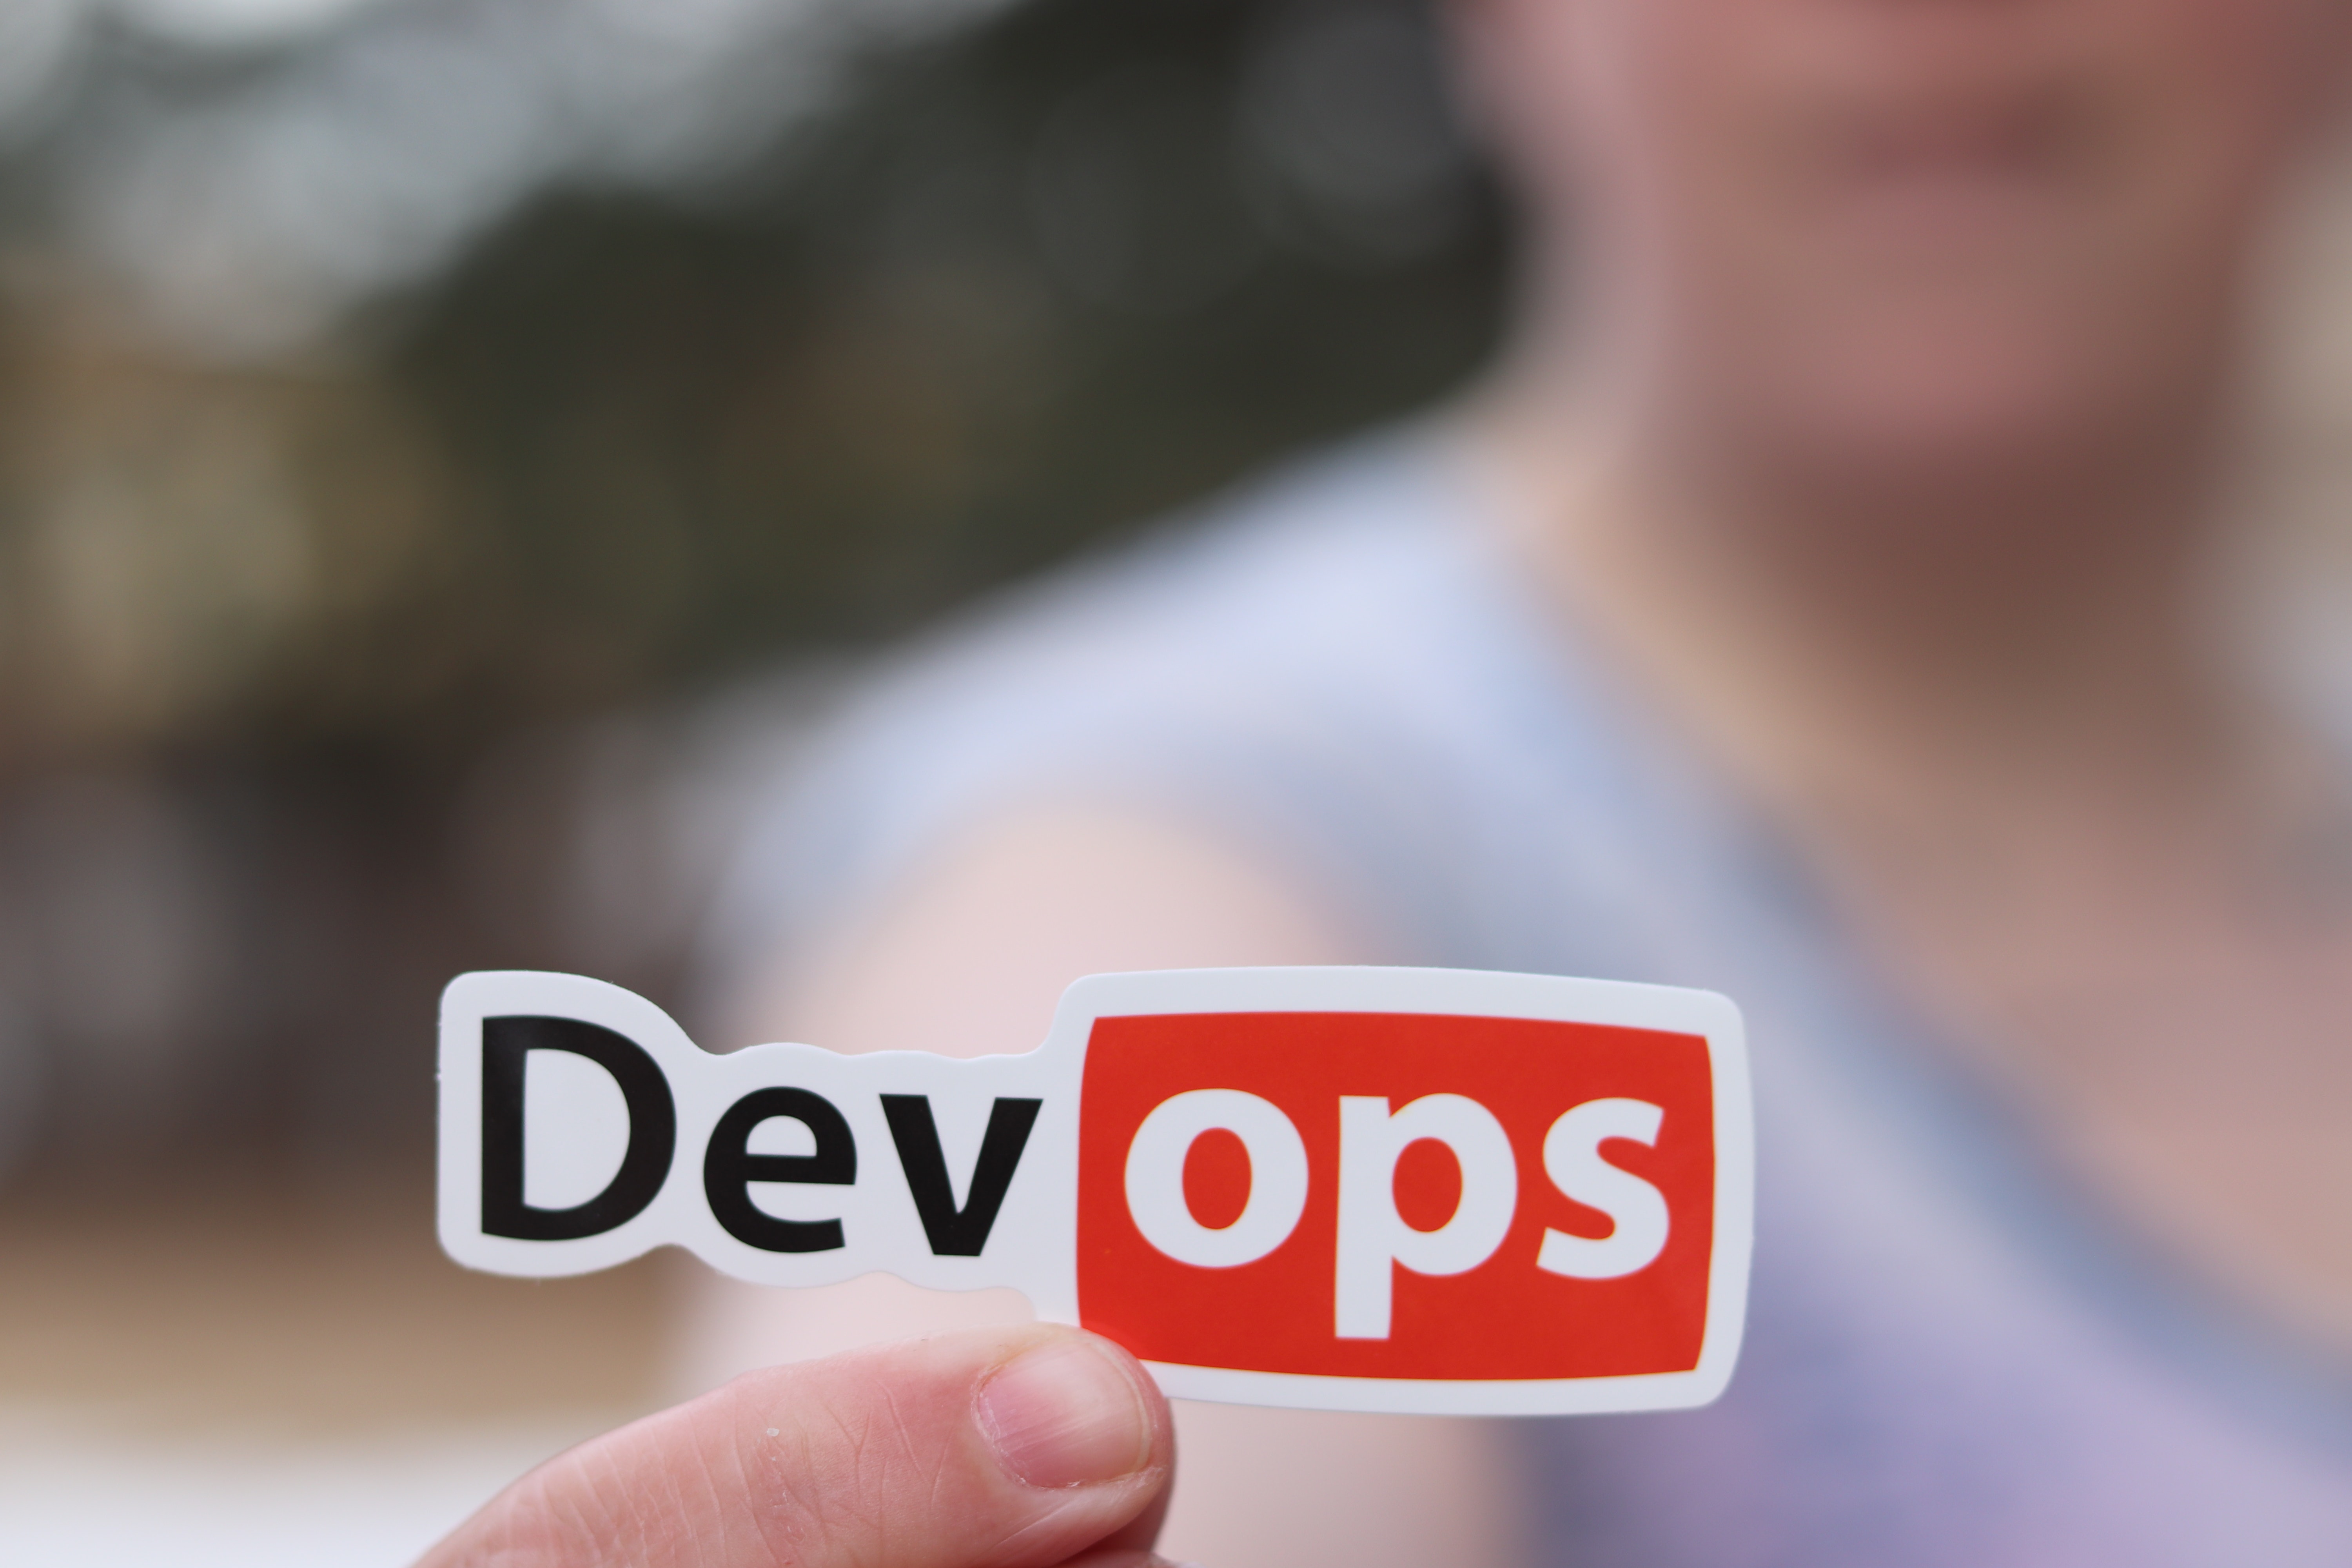 lifecycle in devops blog post image 1